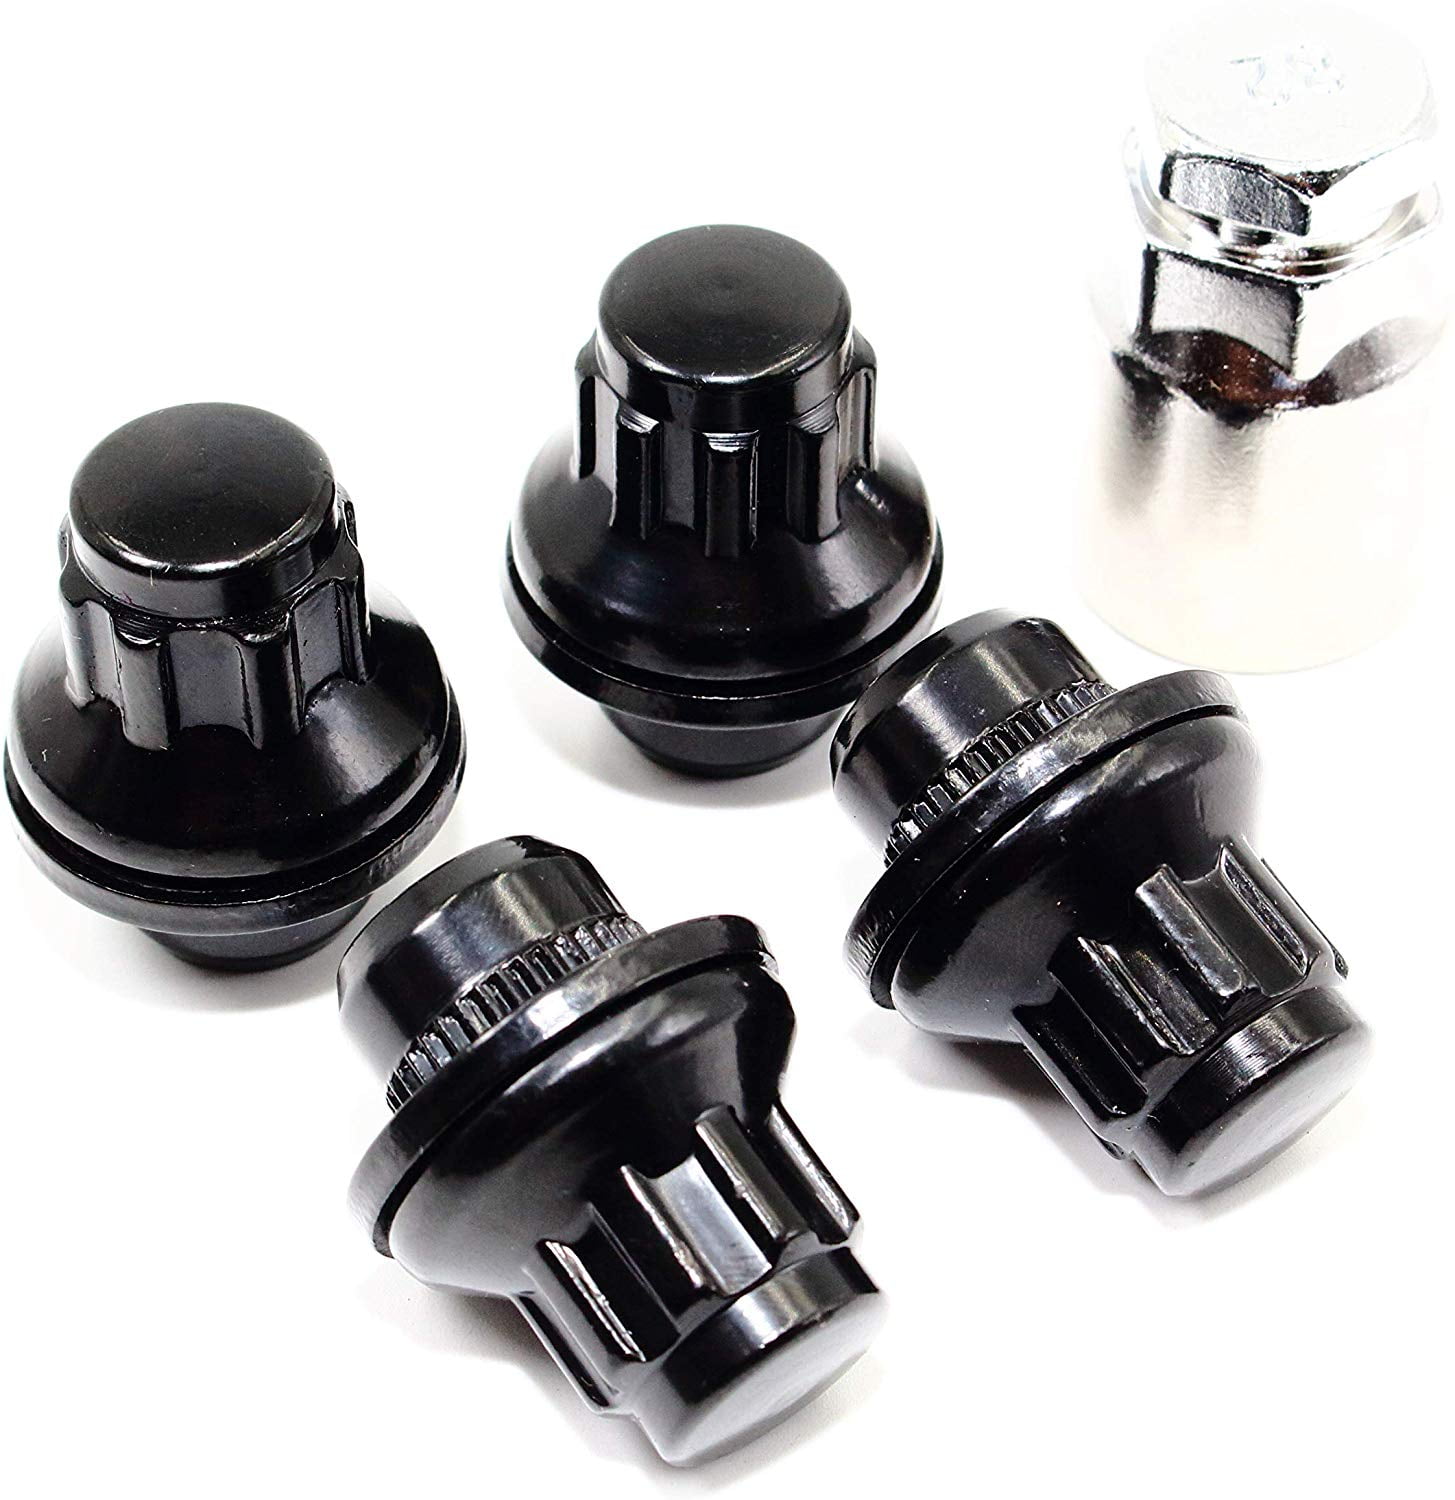 93-99 Locking Wheel Nuts 12x1.5 Bolts Tapered for Toyota Celica Mk6 